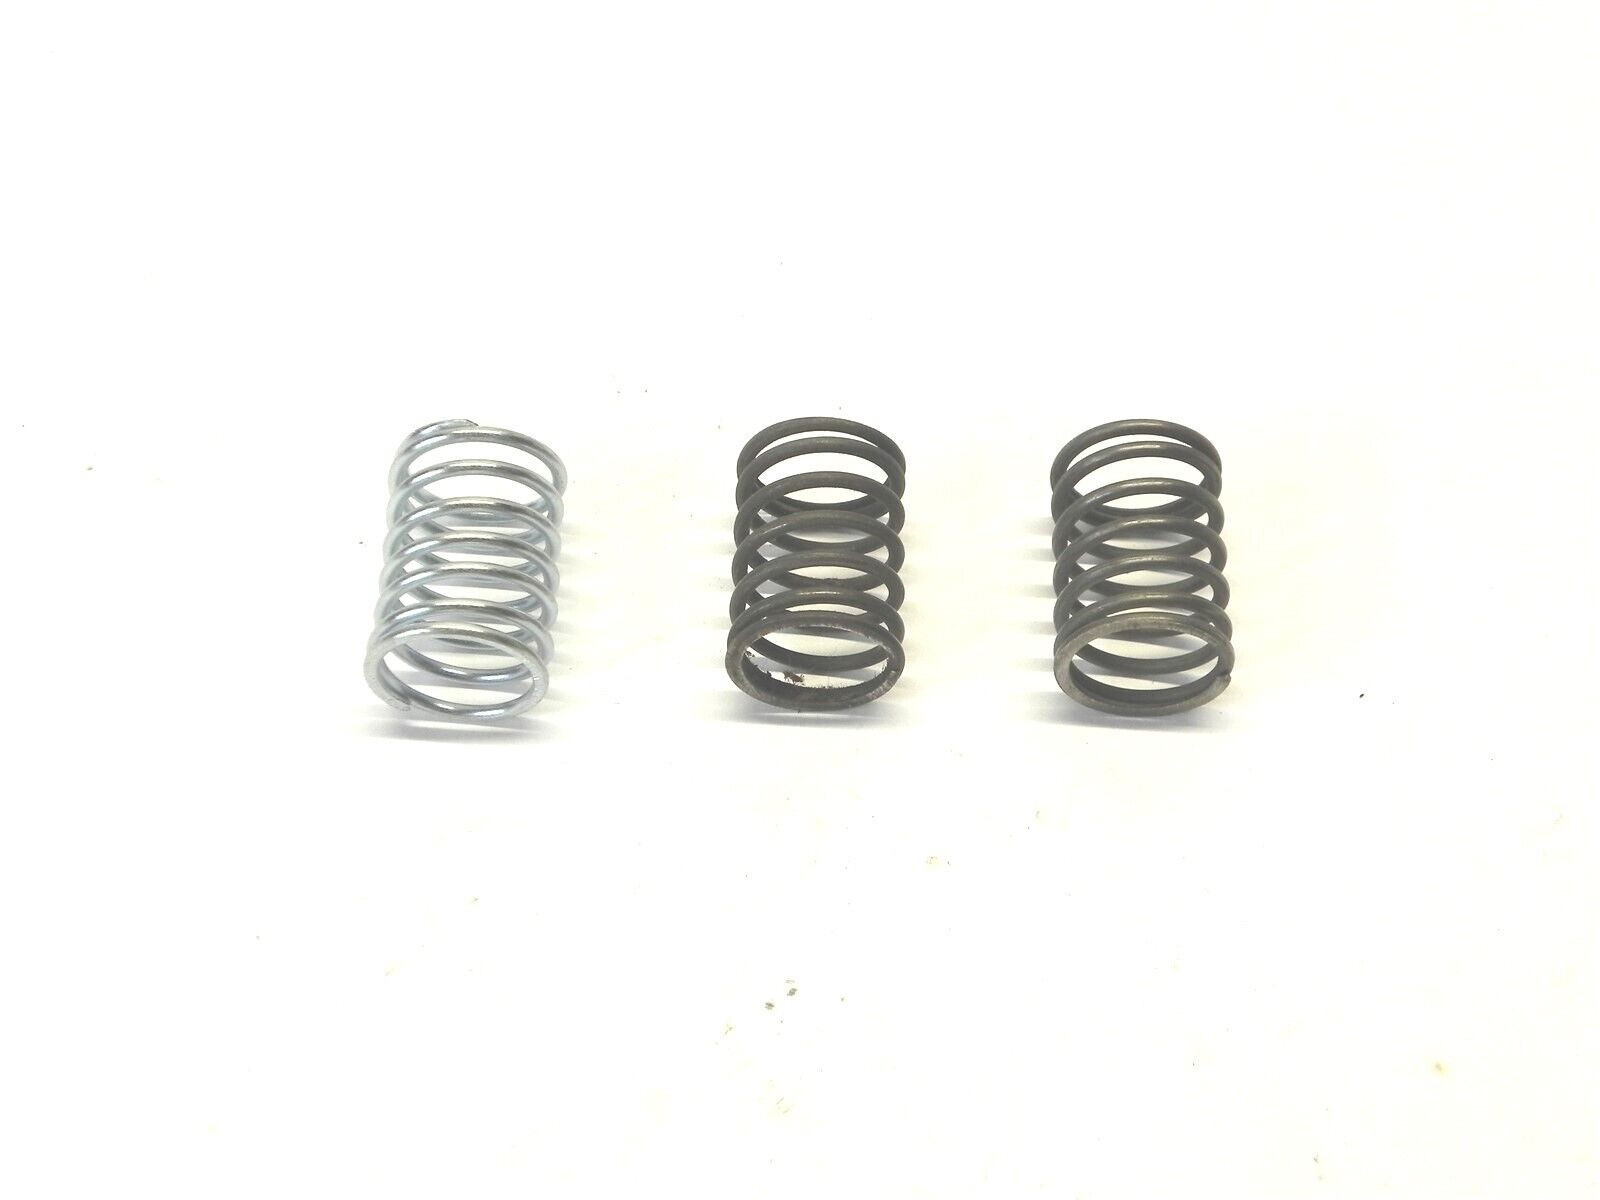 VINTAGE 1928-1939 FORD SWITCH SPIDER SPRINGS LOT OF 3 FORD PART NO. #B-3642 NORS